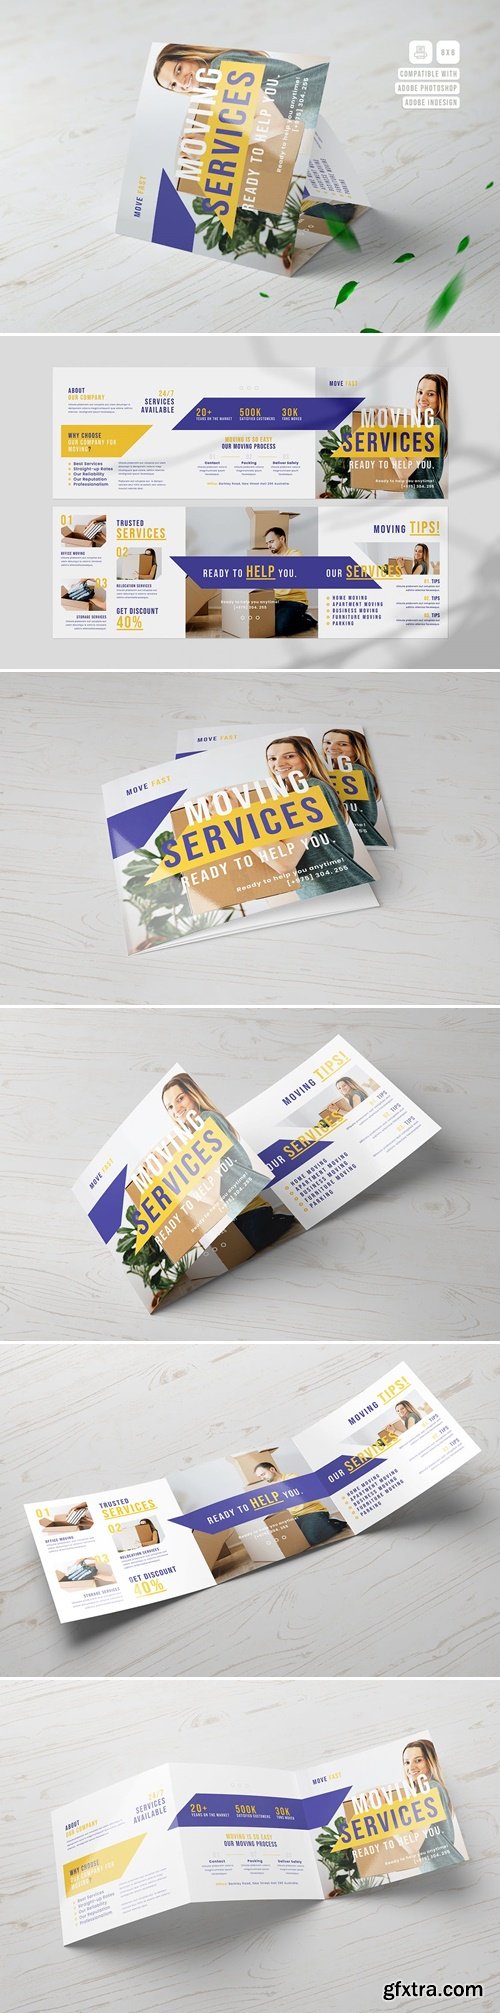 Moving Service Square Trifold Brochure LM2SB93